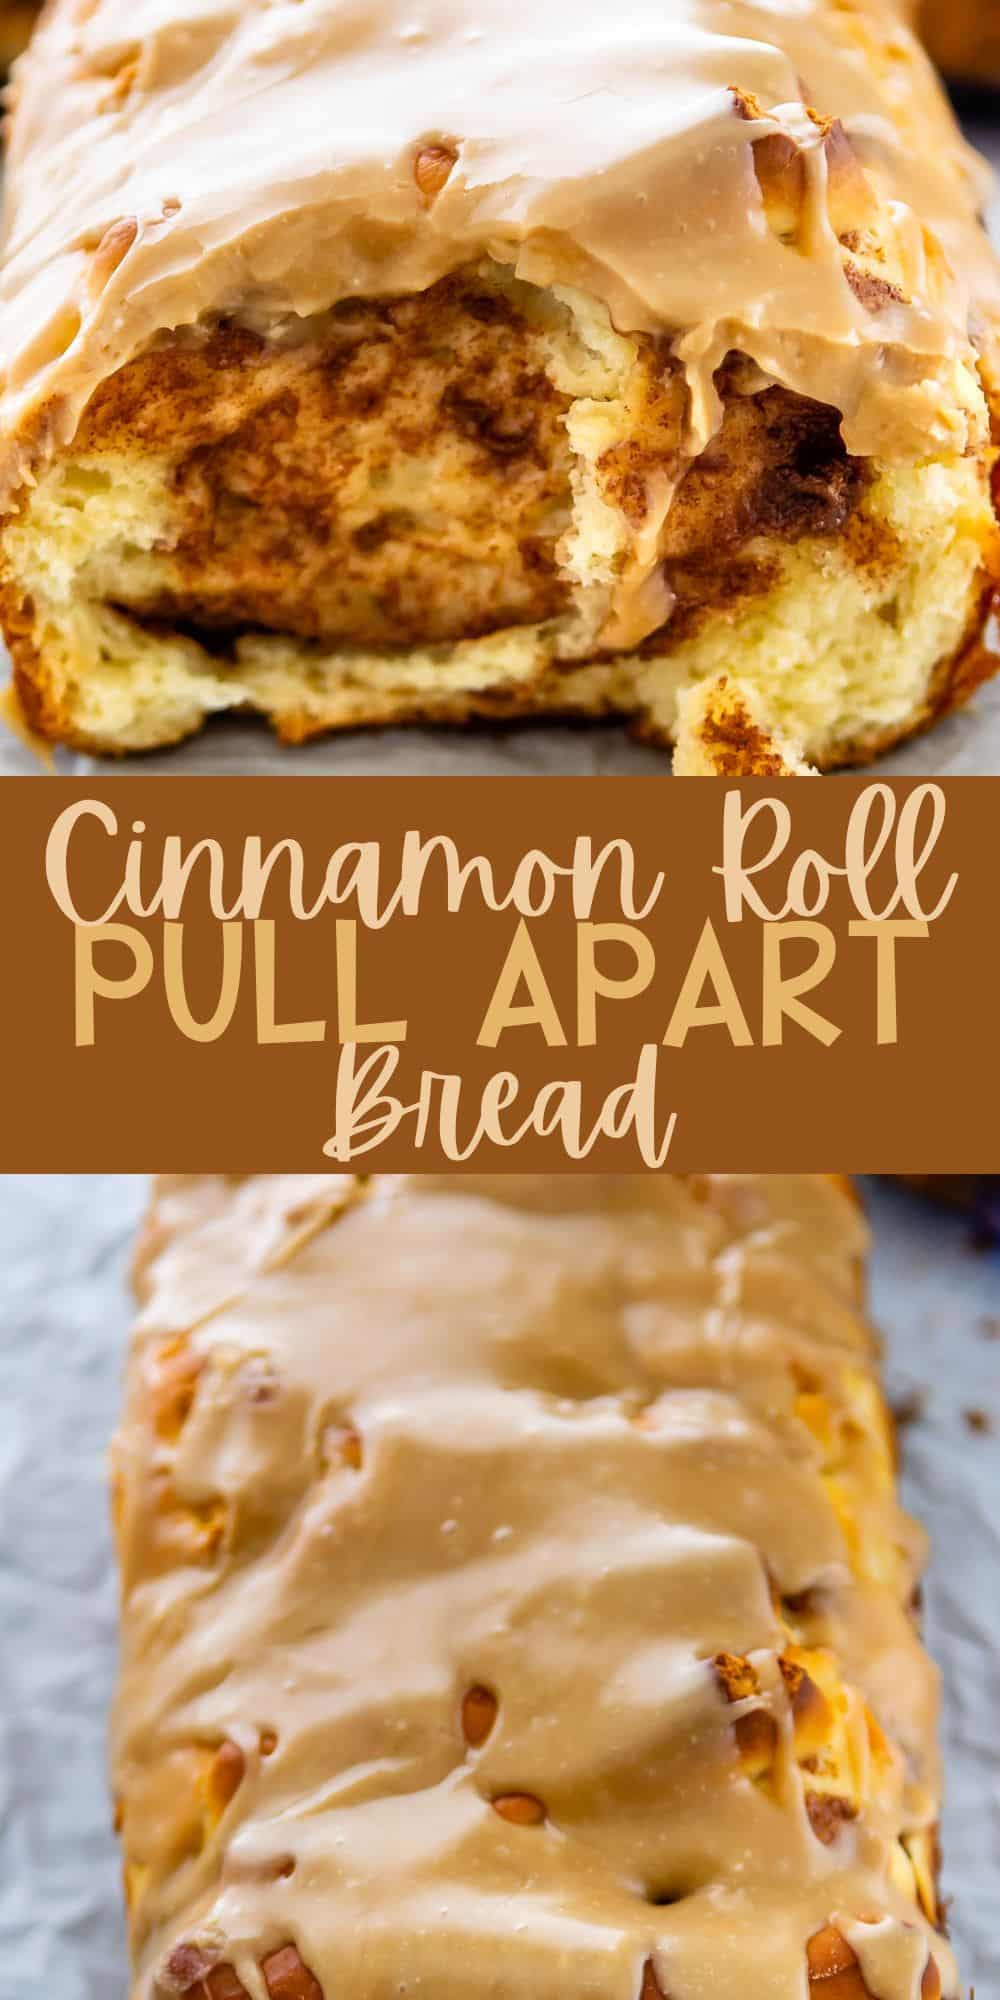 two photos of cinnamon roll sliced and topped with a glaze with words on the image.